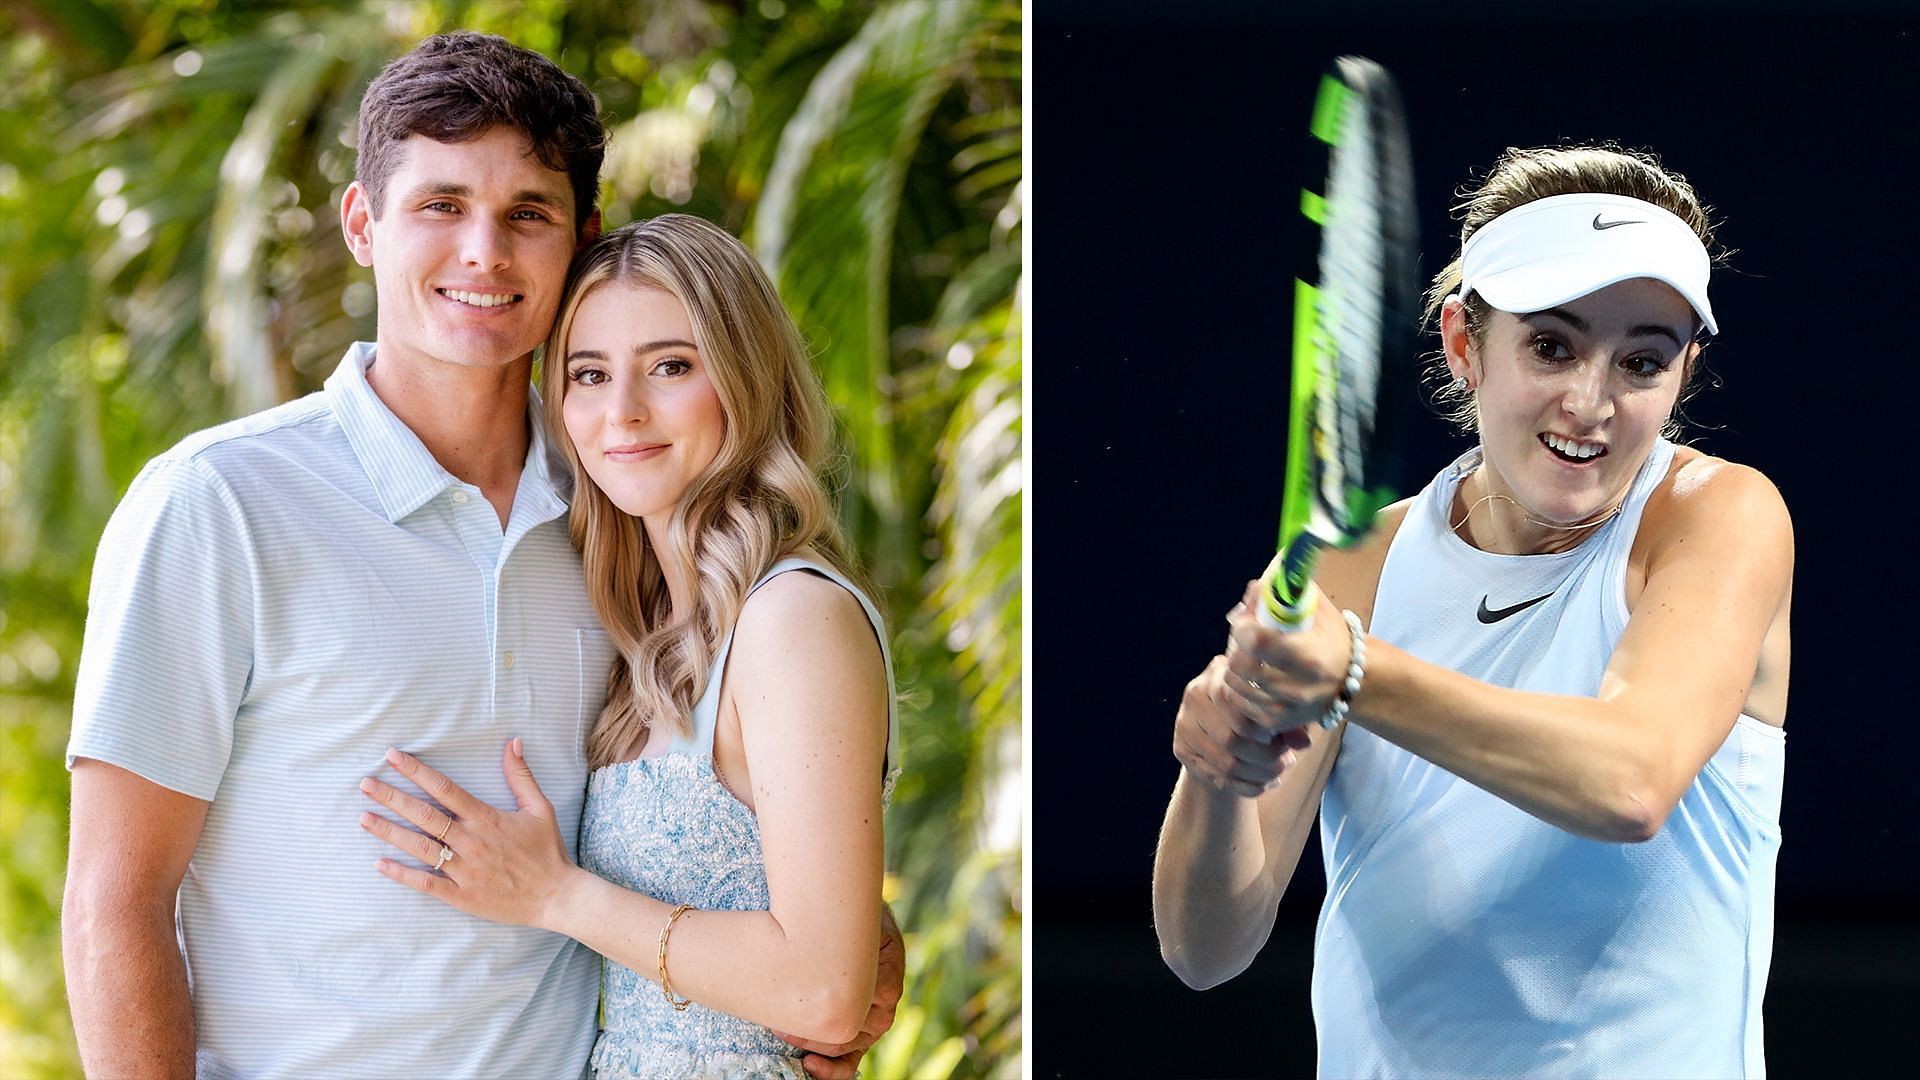 CiCi Bellis shares pictures of the wedding to Sam Riffice